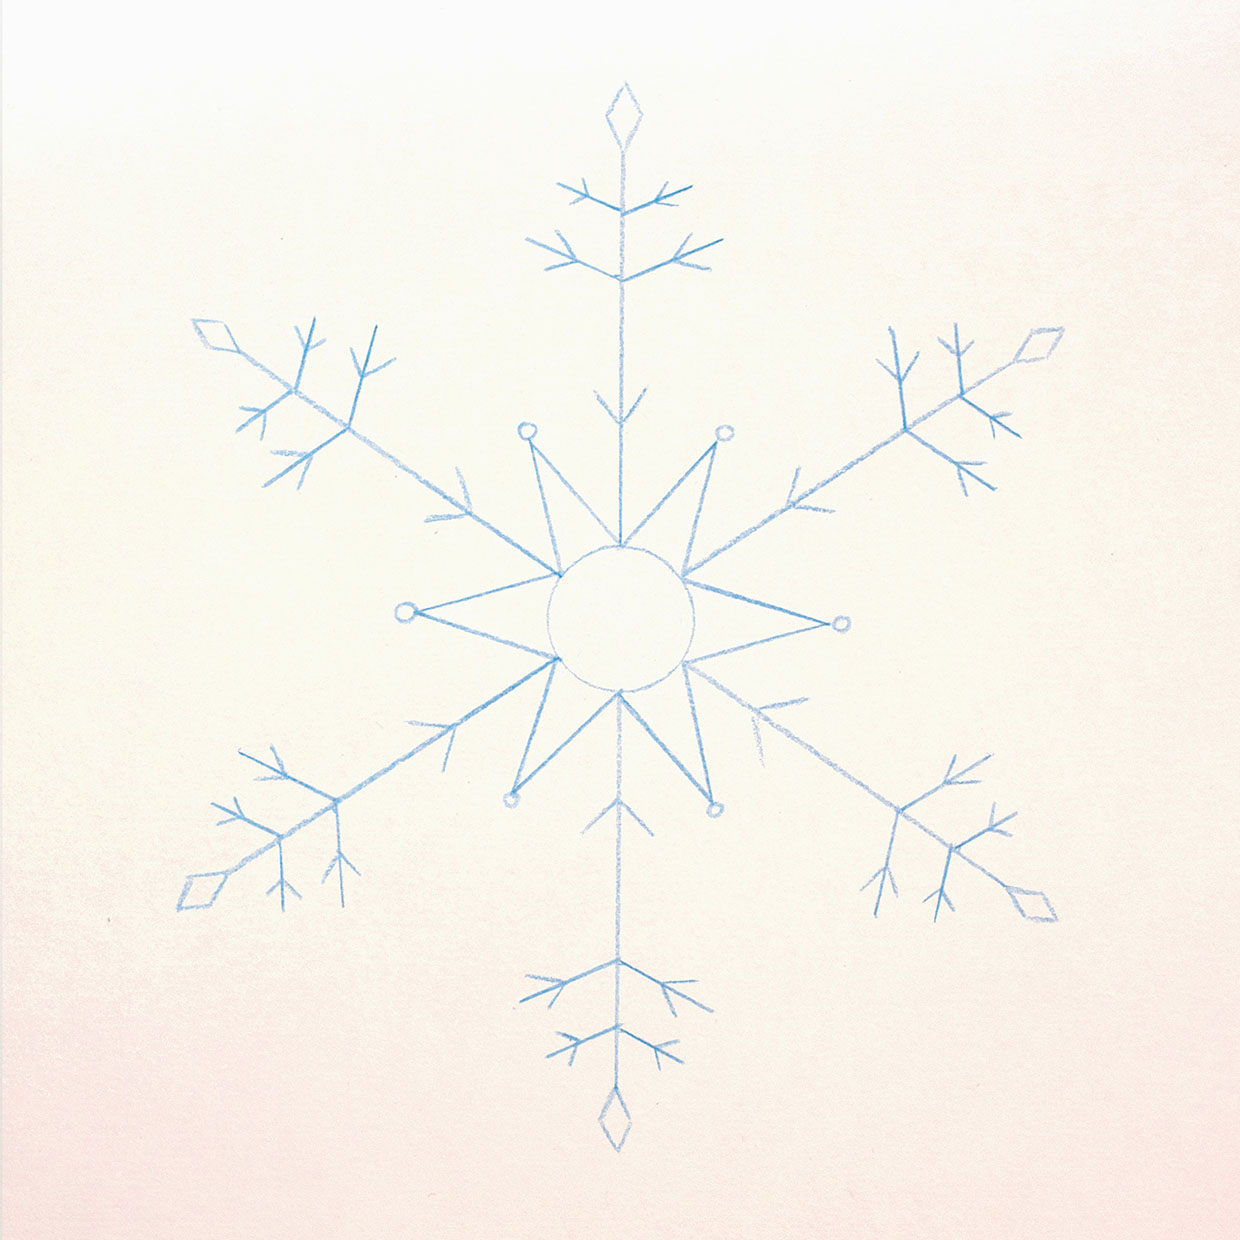 How to draw a snowflake step by step | Easy drawing snowflake tutorial... |  TikTok